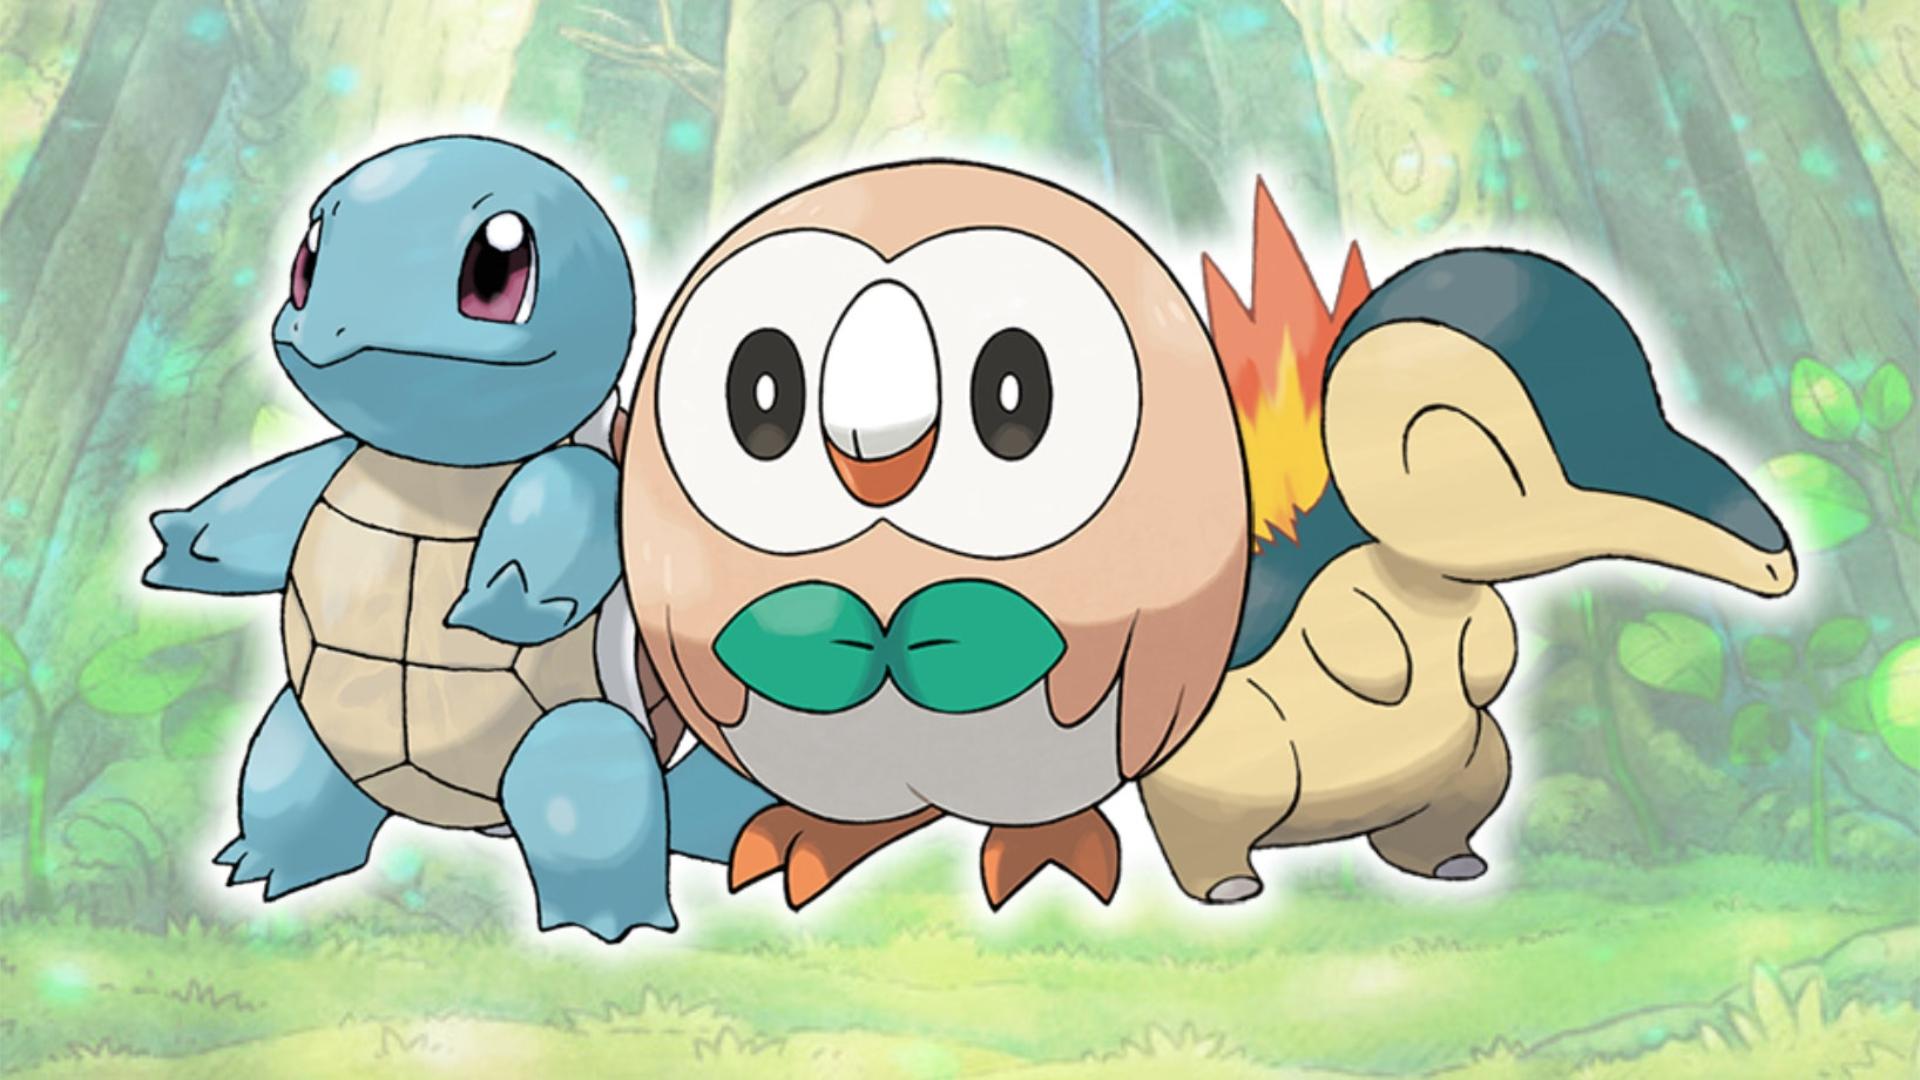 Pokemon X and Y doubles the starters with Bulbasaur, Charmander